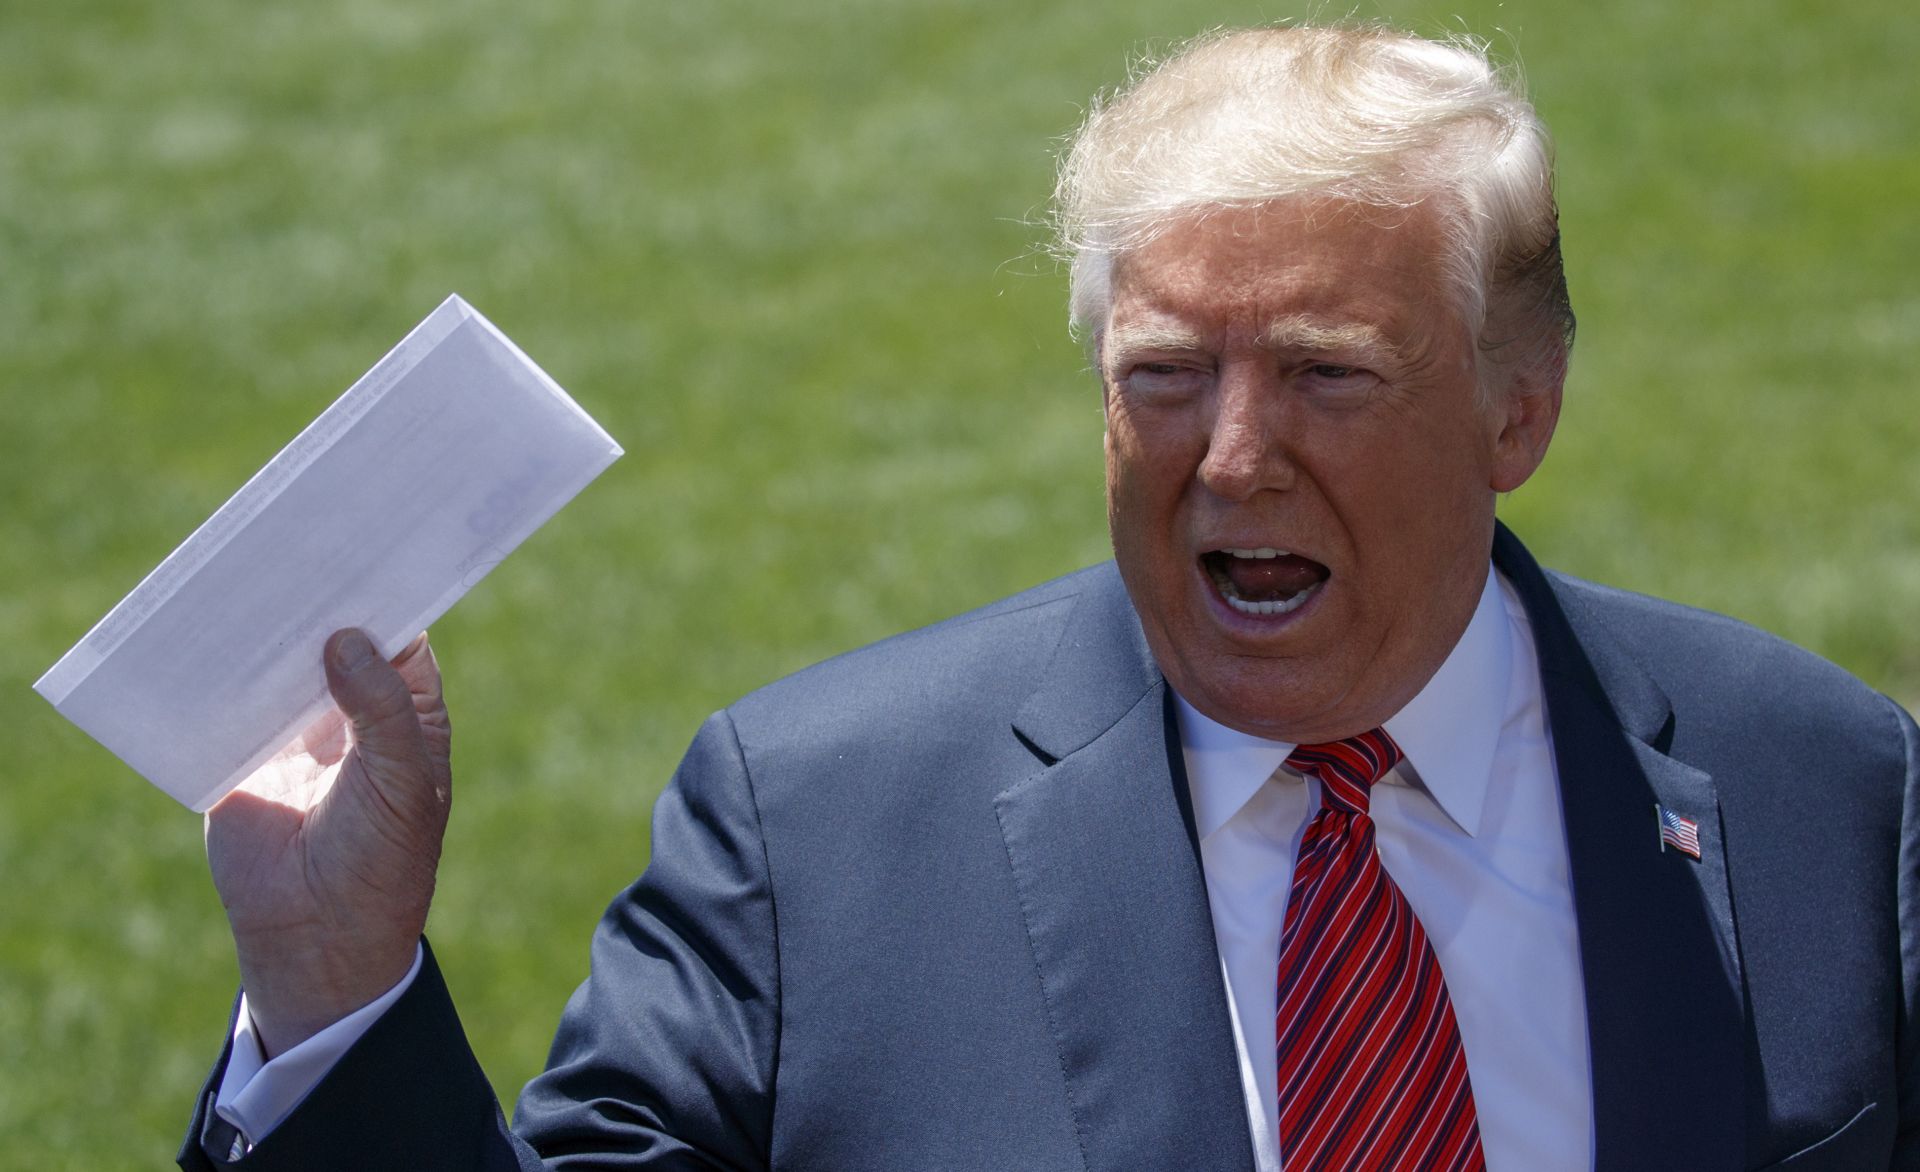 epa07641430 US President Donald J. Trump talks about a page from the USMCA as he responds to a question from the news media on the South Lawn of the White House in Washington, DC, USA, 11 June 2019. President Trump is traveling to Iowa to attend a renewable energy event and the Republican Party of Iowa annual dinner.  EPA/SHAWN THEW